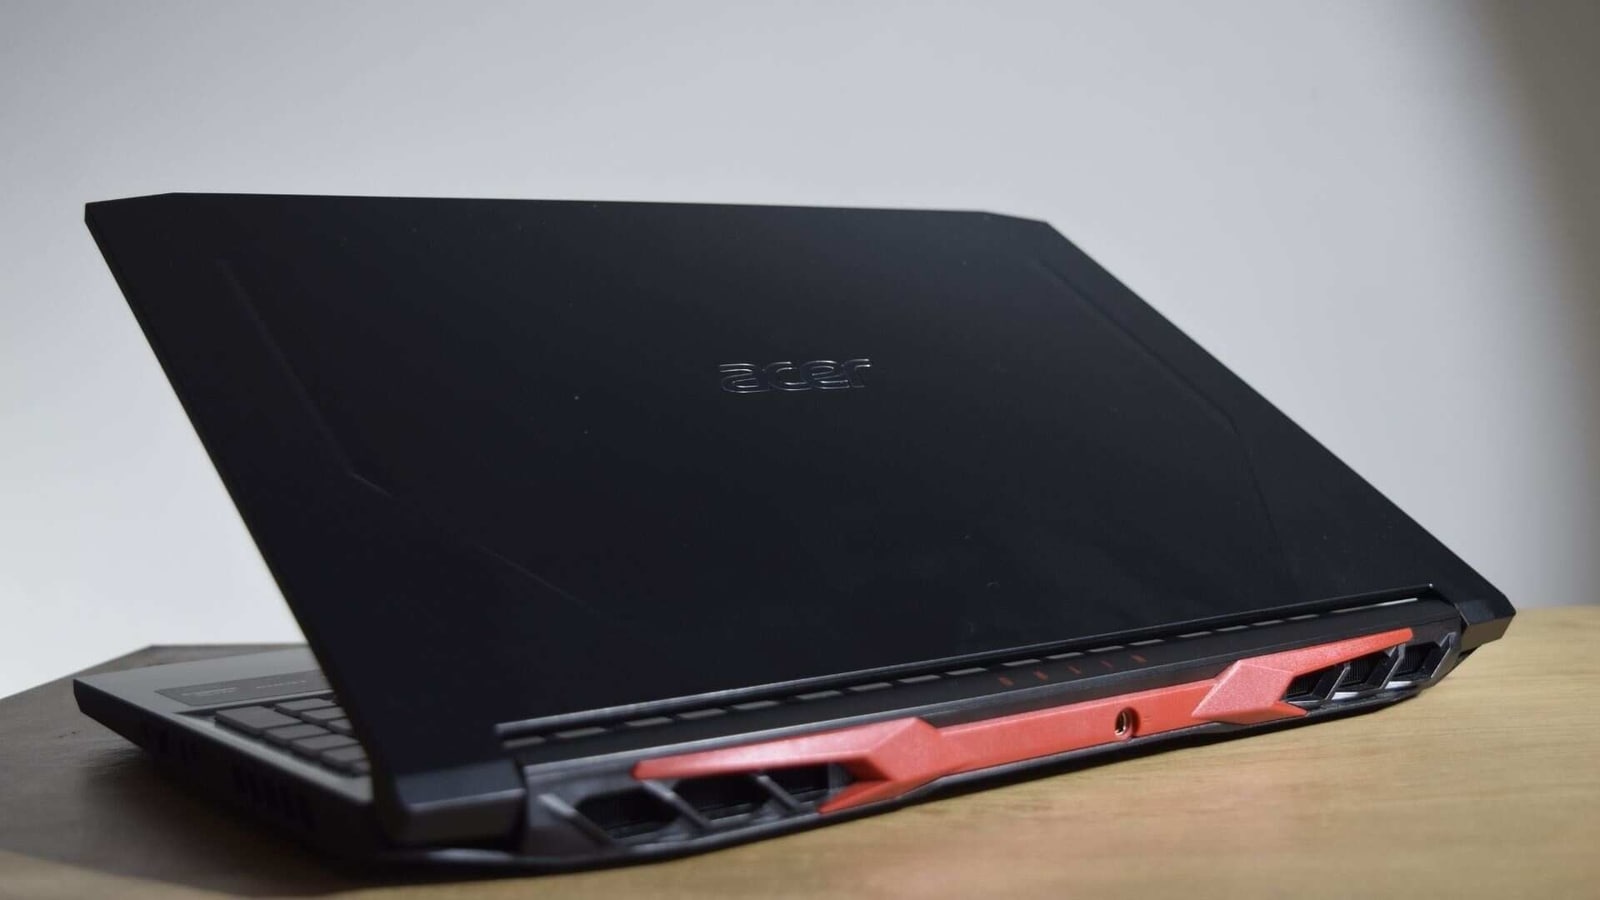 Acer's latest Nitro 5 gaming laptop seems more powerful than ever